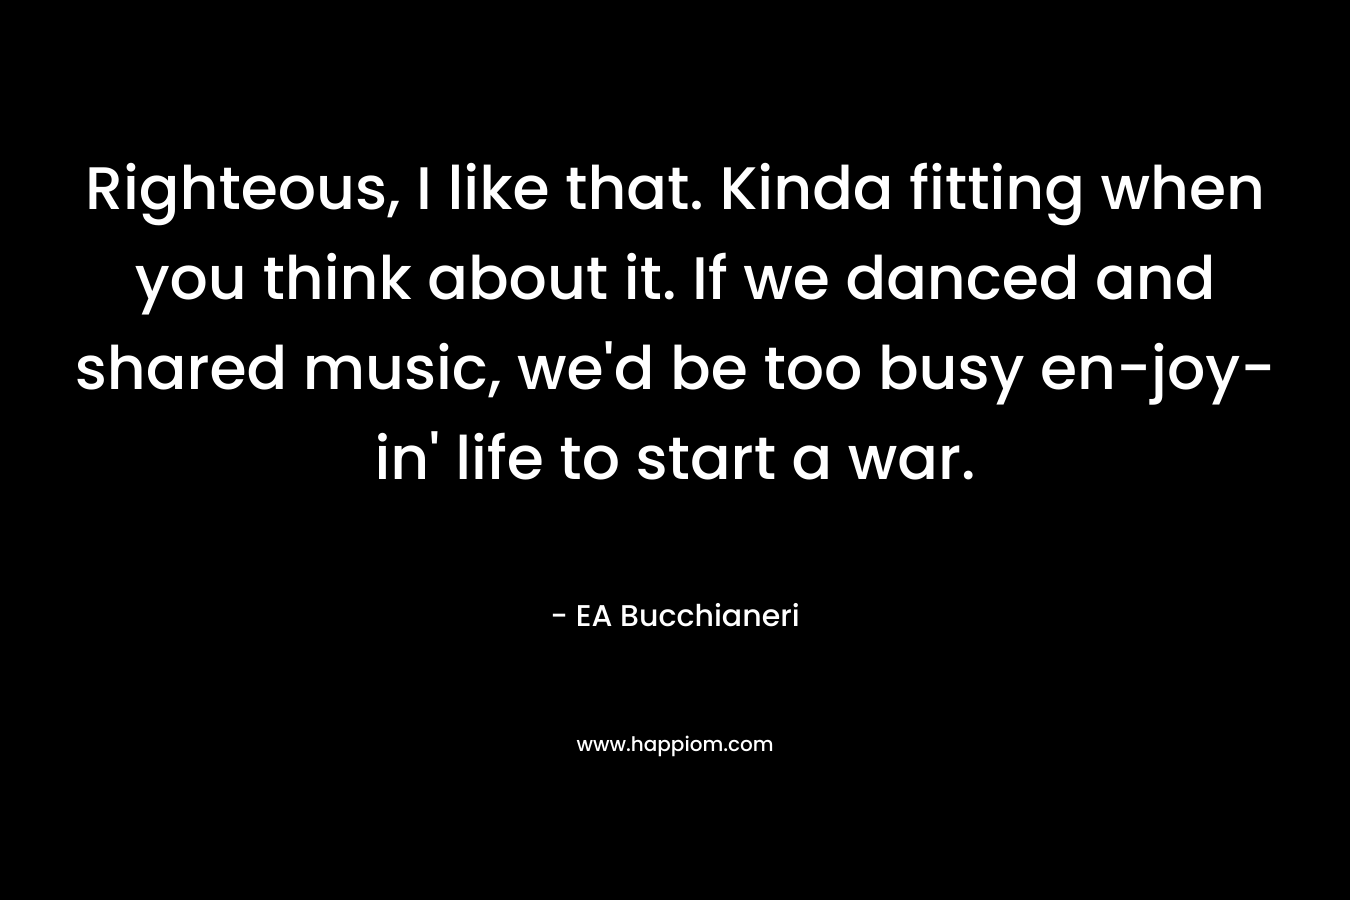 Righteous, I like that. Kinda fitting when you think about it. If we danced and shared music, we'd be too busy en-joy-in' life to start a war.